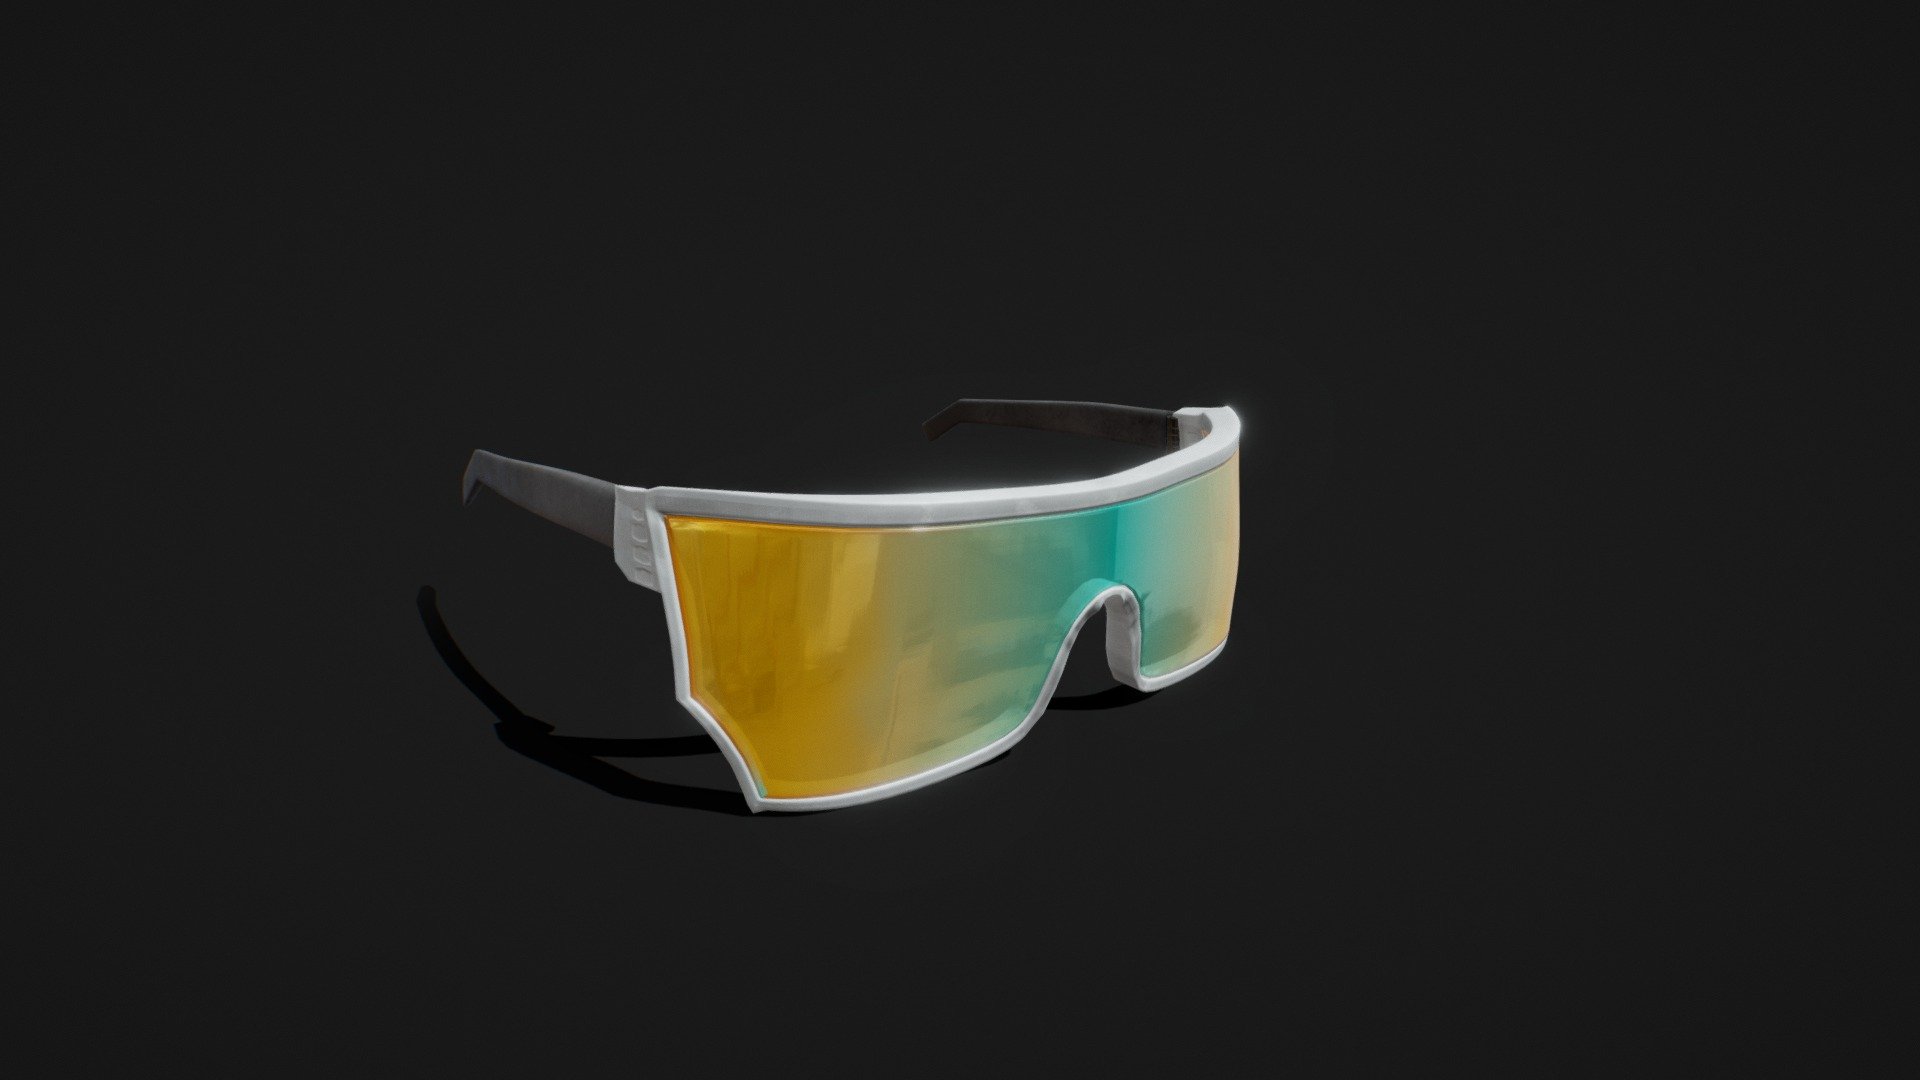 Feel the Magic, with the new Polarized Sunglasses from the Summer Swag pack
Part of the Drip and Swag Series!

Right here on Sketchfab and the Unreal Marketplace!

Includes PBR Textures
Rigged Frame
FBX - Magics - Polarized Sunglasses - Buy Royalty Free 3D model by Isaack - Tacko The 3D Guy (@isaackgamma) 3d model